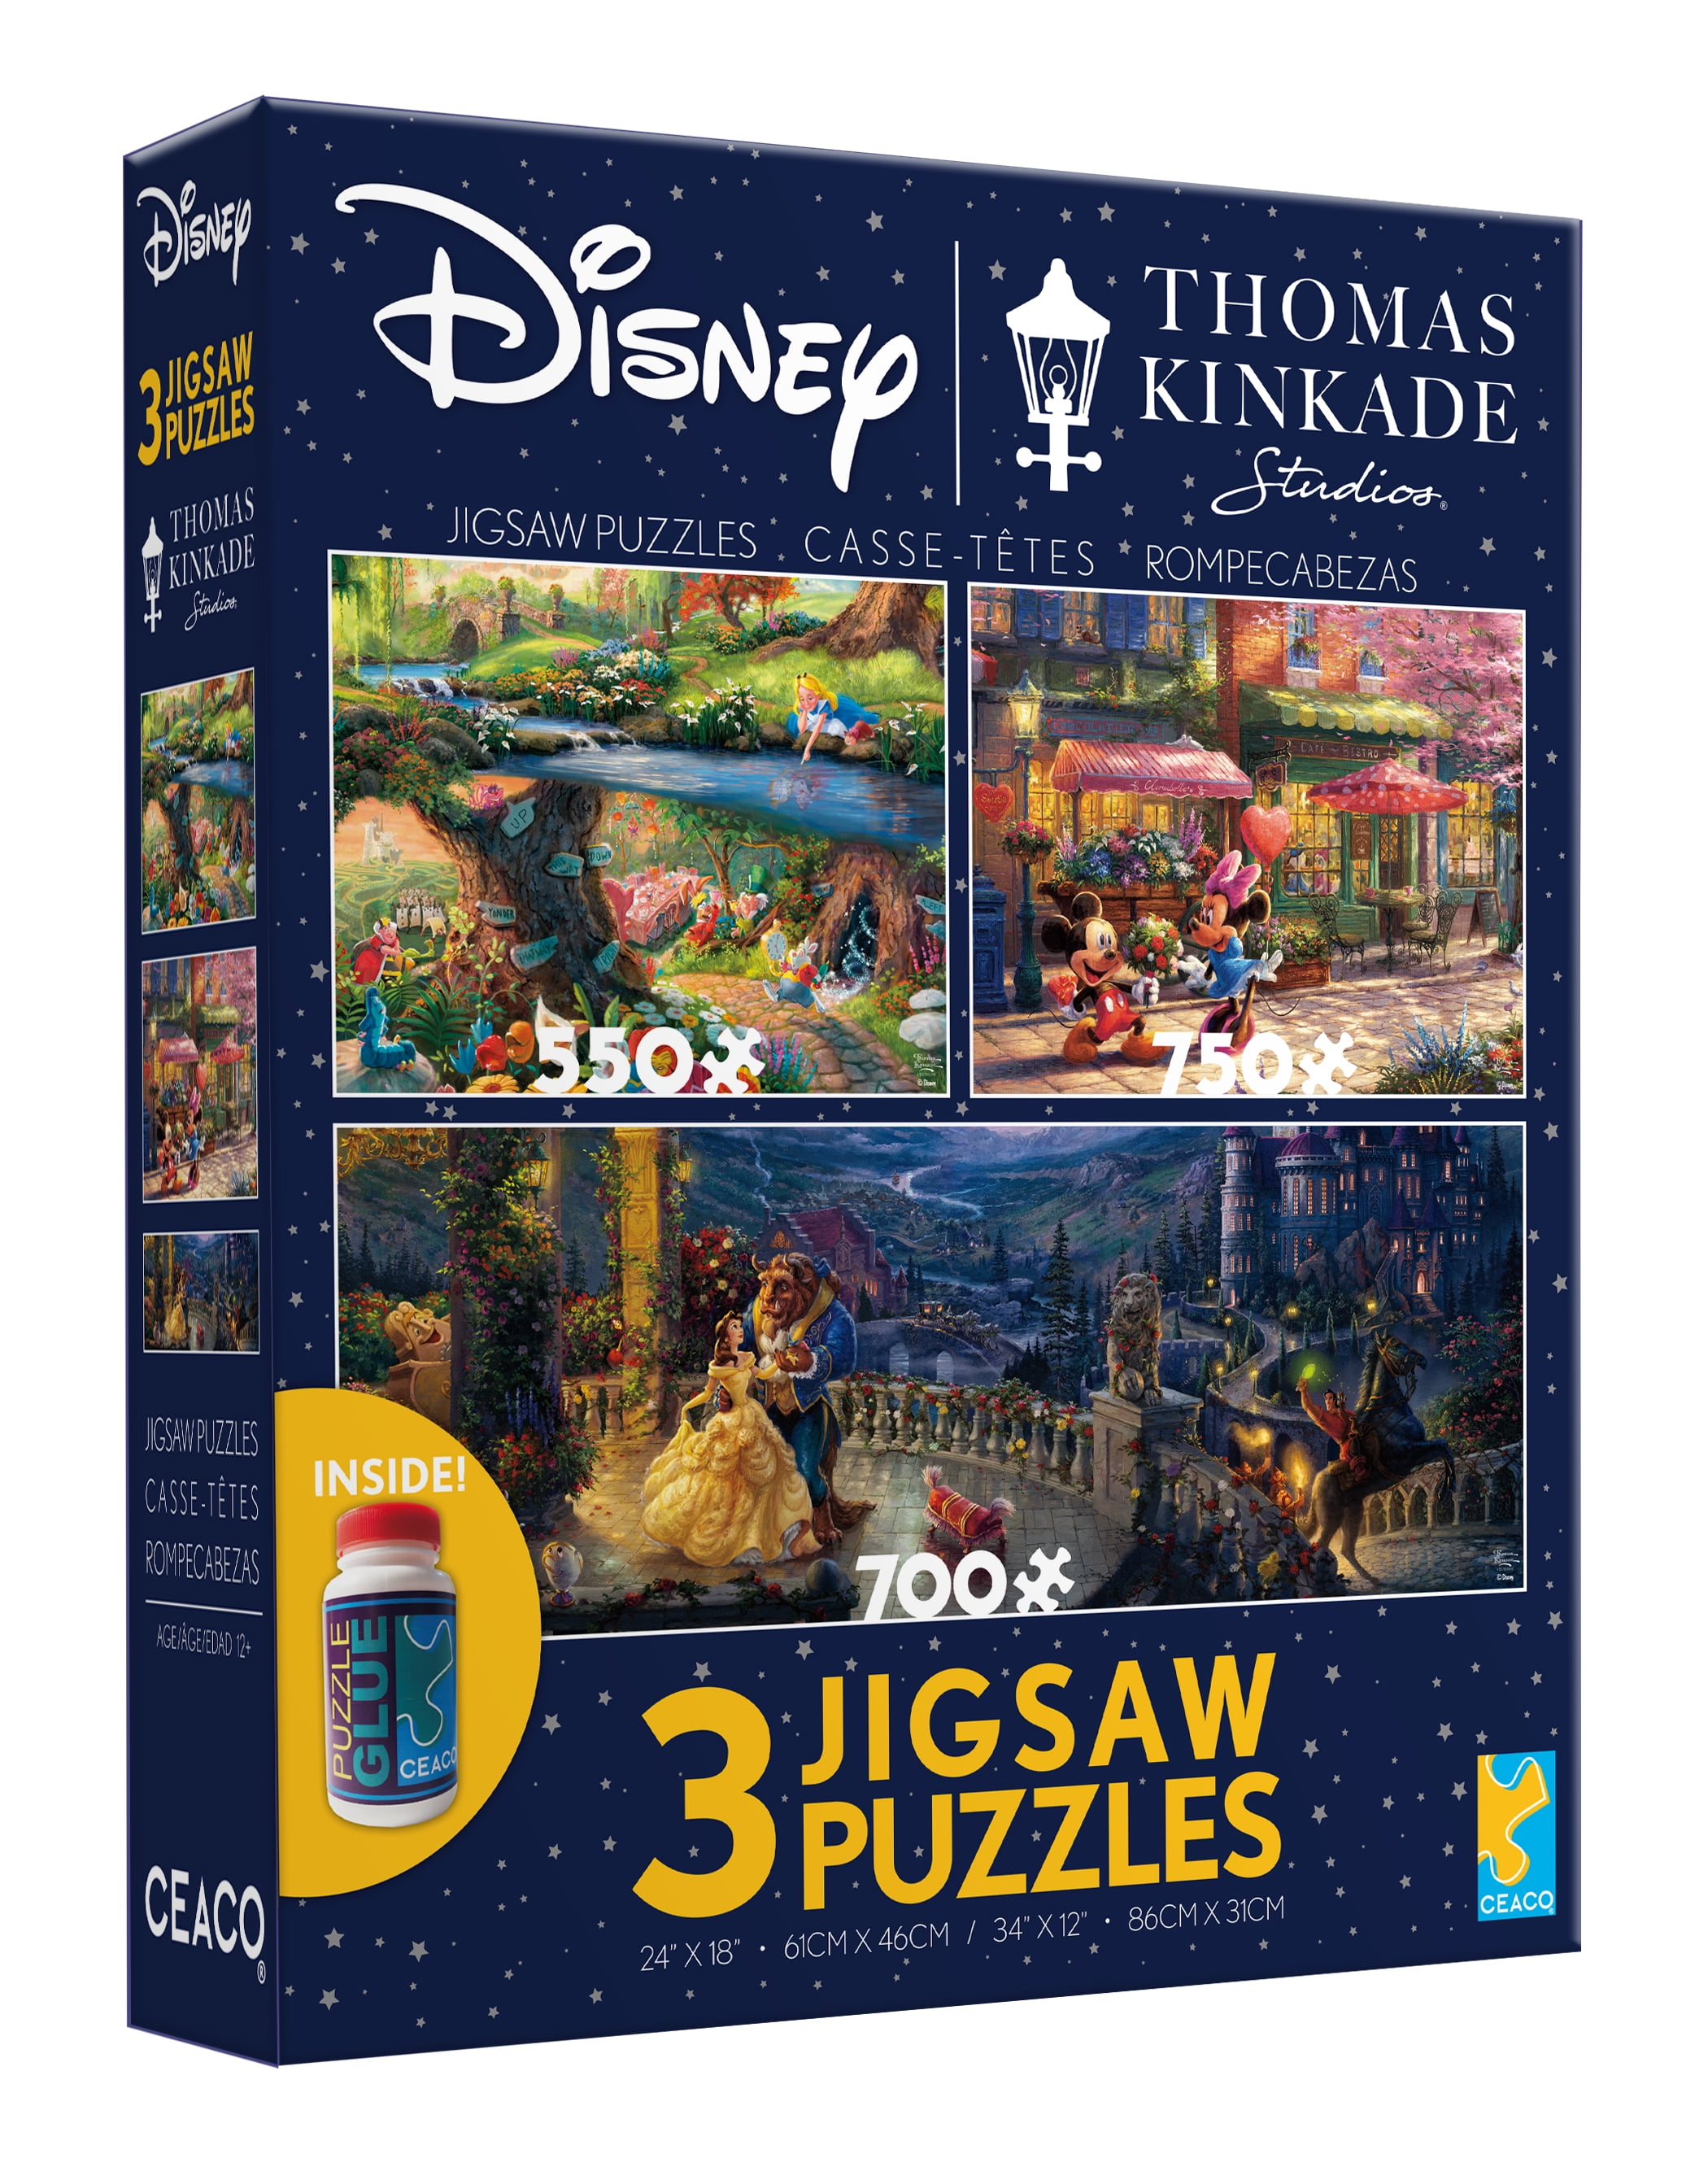 Thomas Kinkade Studios Beauty and the Beast Dancing 750 Piece Ceaco Puzzle 